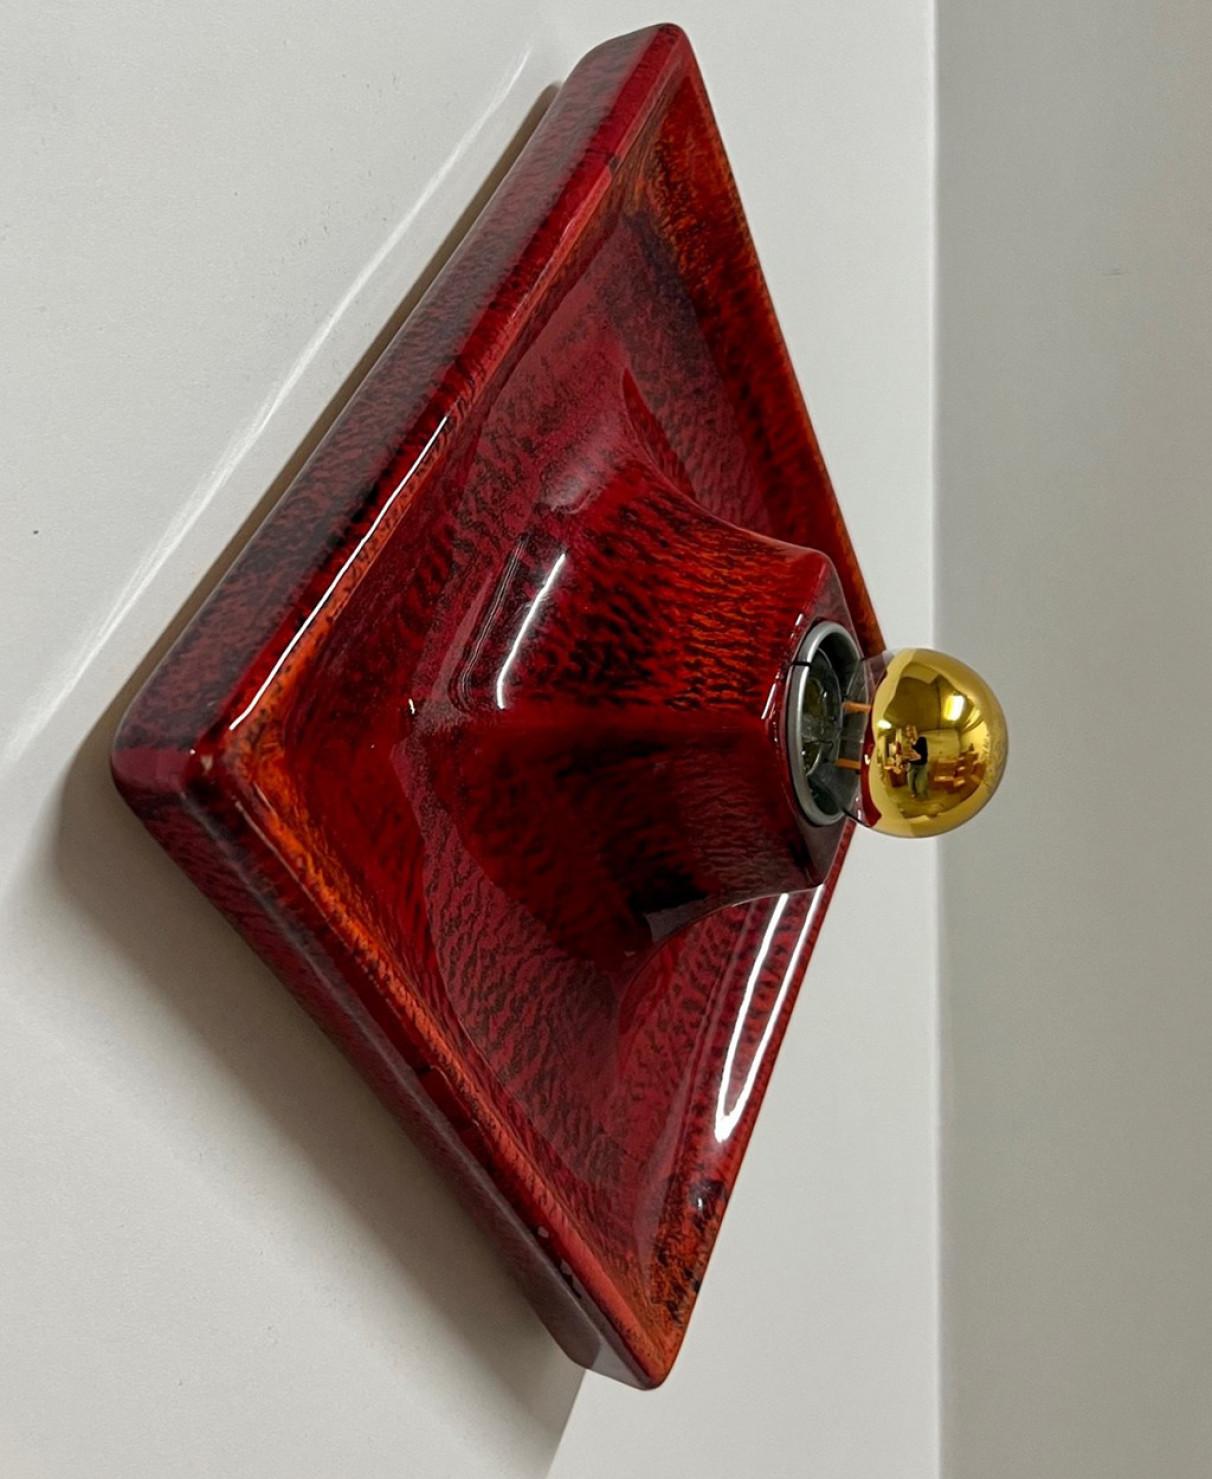 Glazed Red Square Ceramic Wall Lights by Hustadt Keramik, Germany, 1970 For Sale